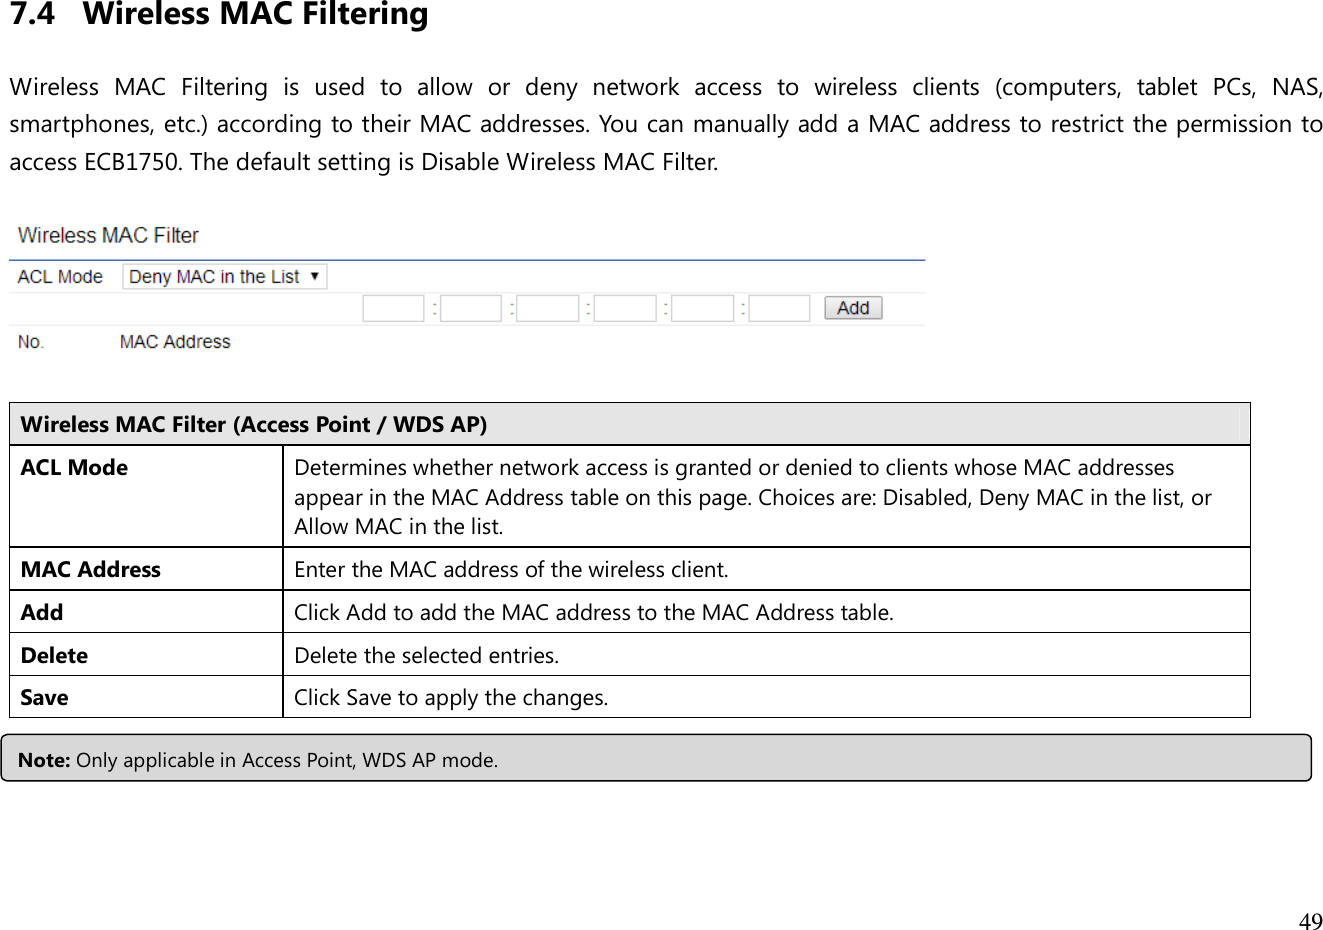  49   7.4 Wireless MAC Filtering  Wireless  MAC  Filtering  is  used  to  allow  or  deny  network  access  to  wireless  clients  (computers,  tablet  PCs,  NAS, smartphones, etc.) according to their MAC addresses. You can manually add a MAC address to restrict the permission to access ECB1750. The default setting is Disable Wireless MAC Filter.    Wireless MAC Filter (Access Point / WDS AP) ACL Mode Determines whether network access is granted or denied to clients whose MAC addresses appear in the MAC Address table on this page. Choices are: Disabled, Deny MAC in the list, or Allow MAC in the list. MAC Address Enter the MAC address of the wireless client. Add Click Add to add the MAC address to the MAC Address table. Delete Delete the selected entries. Save Click Save to apply the changes.   Note: Only applicable in Access Point, WDS AP mode. 